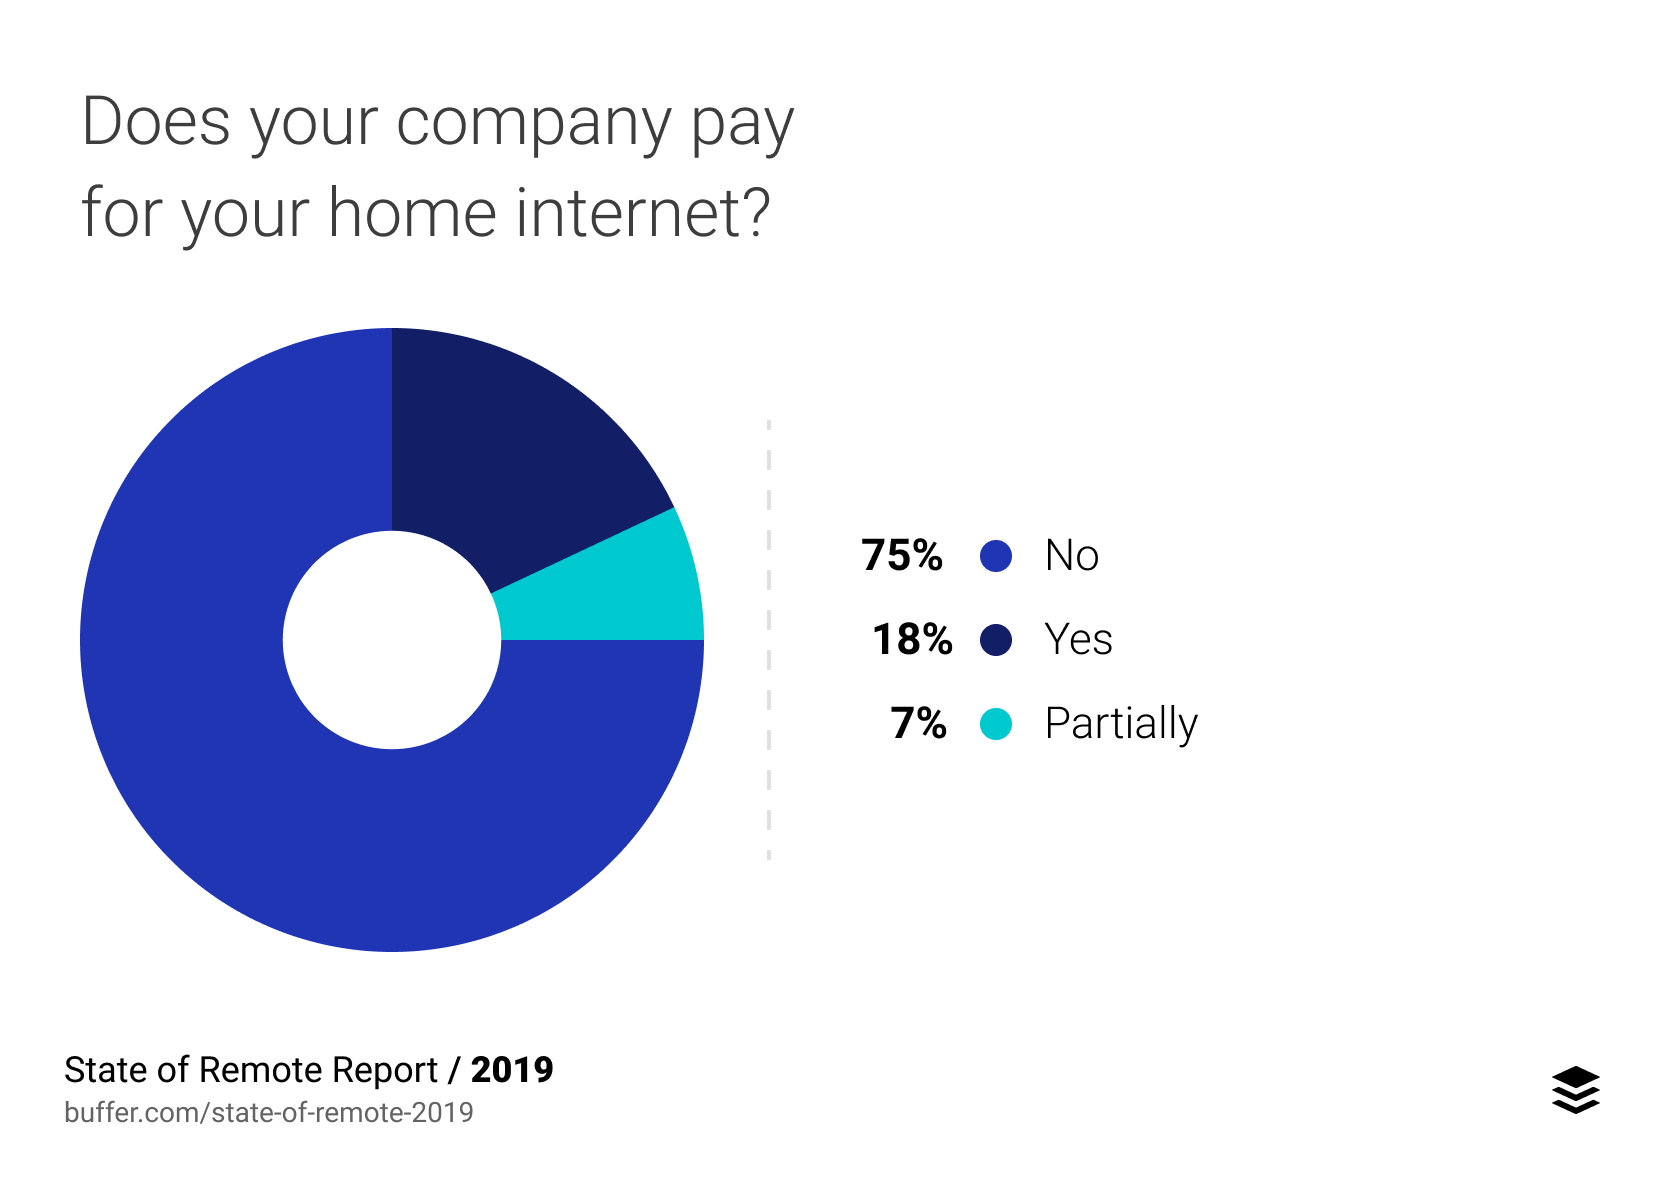 Does your company pay for your home internet?